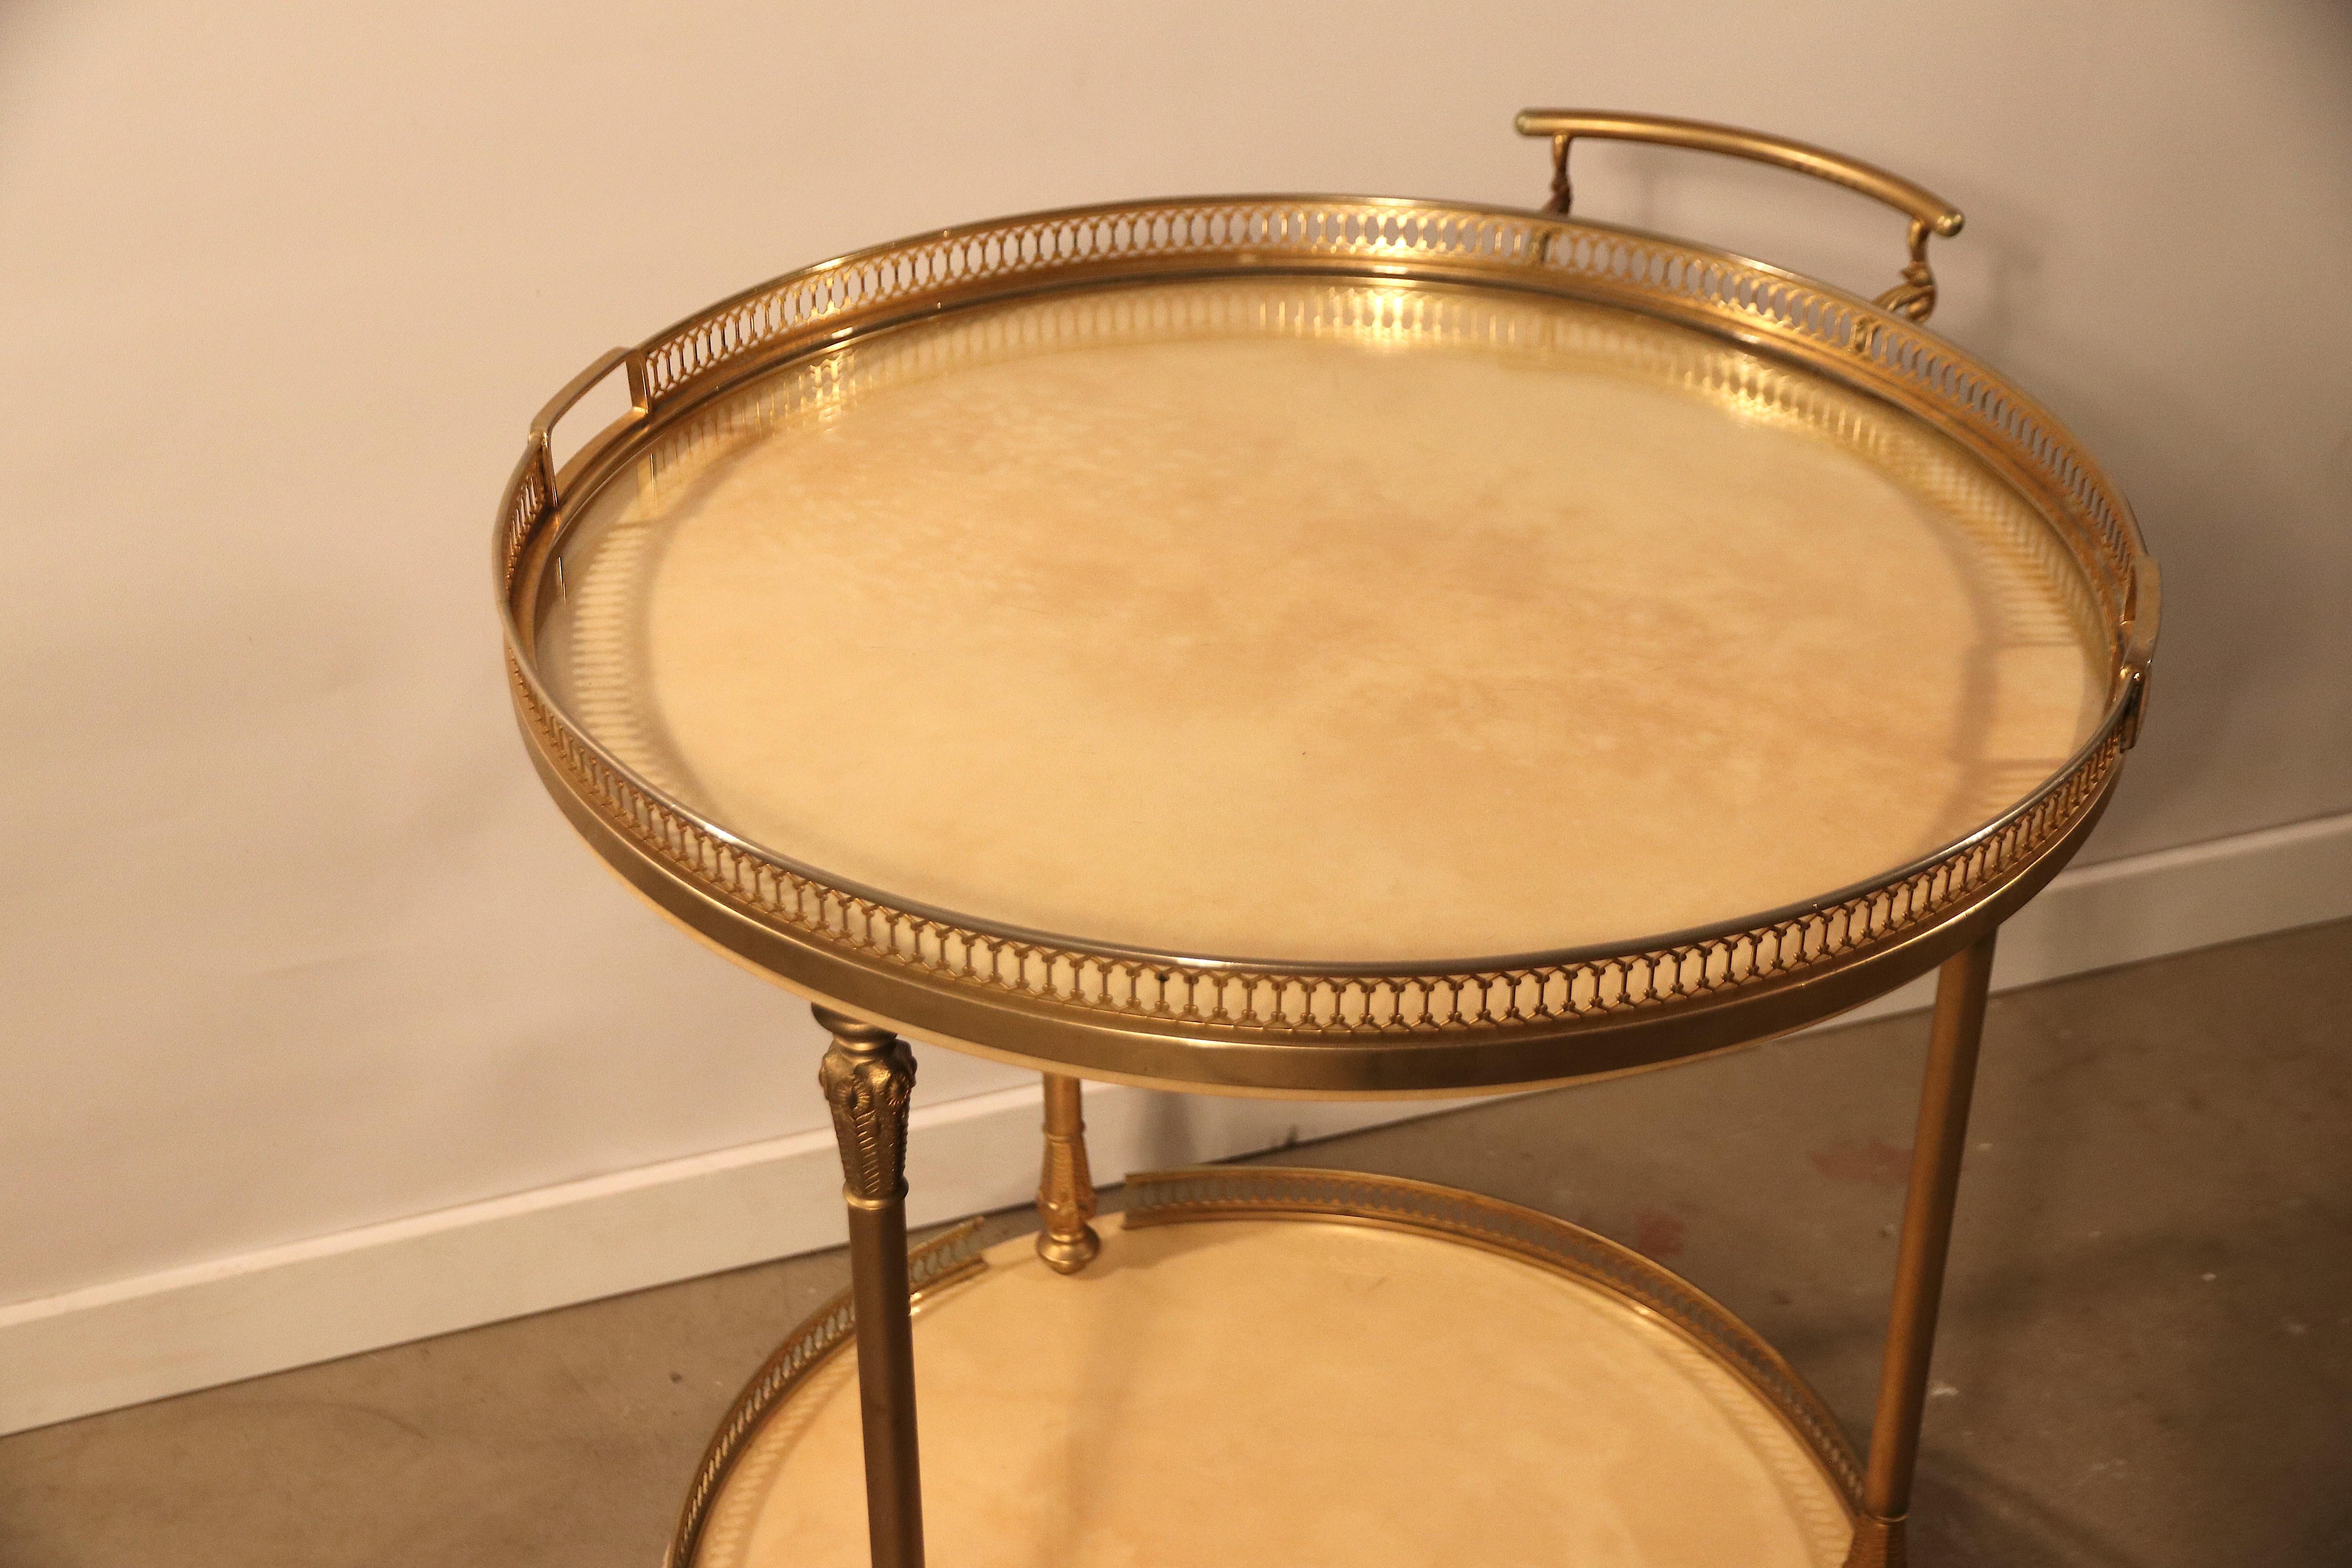 Astonishing piece designed and signed by Aldo Tura in vivid-crème yellow-brown dyed goatskin leather or parchment. This is a 2-tier bar cart or tea / serving drinks trolley on 3 beautifully covered typically 1950s streamline brass casters. The top